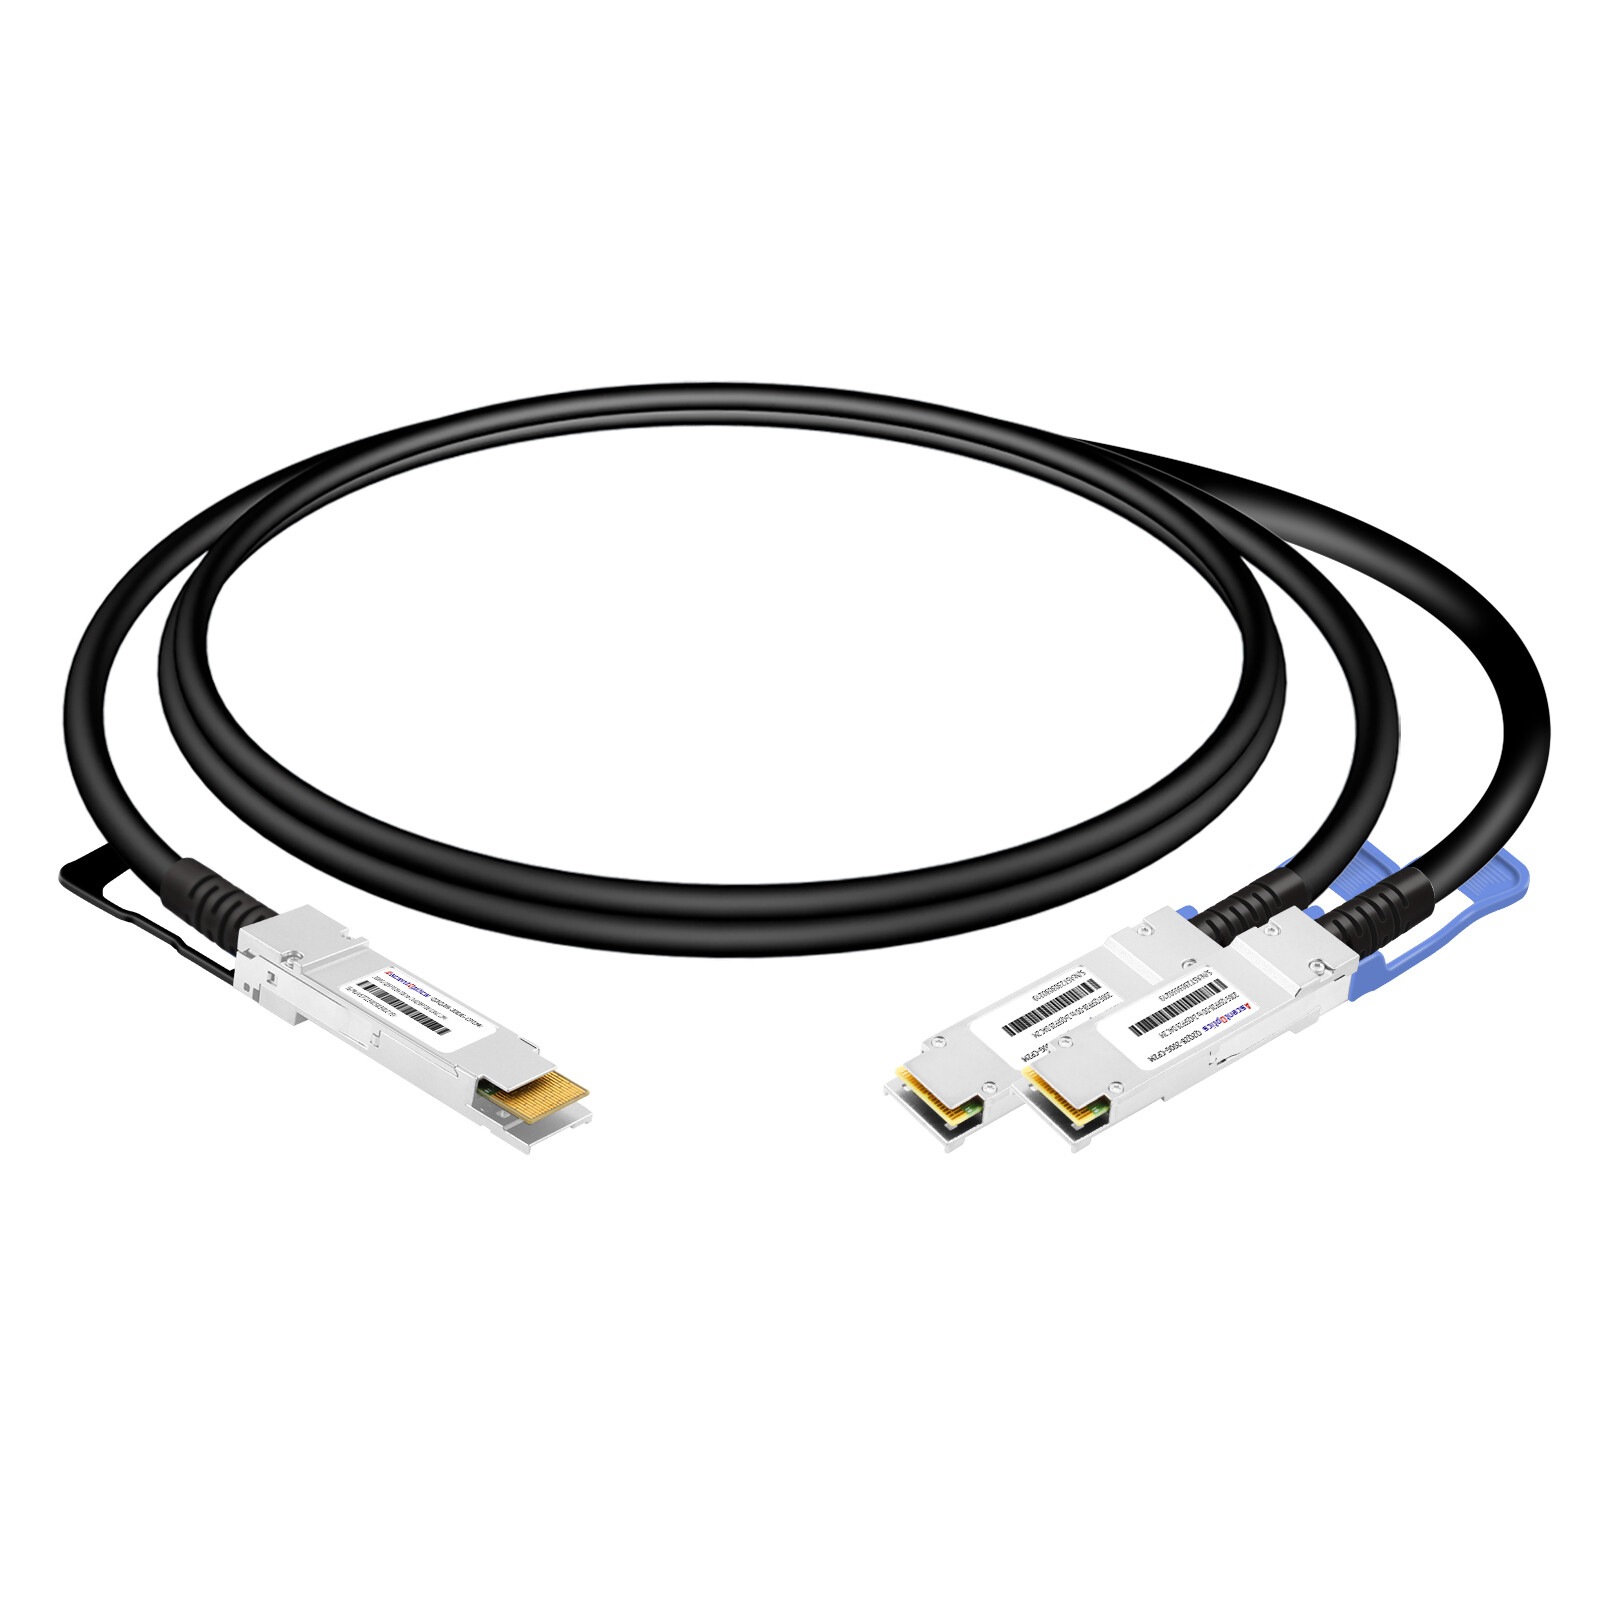 200G QSFP28-DD to 2x 100G QSFP28 Copper Breakout Cable,2 Meters,Passive